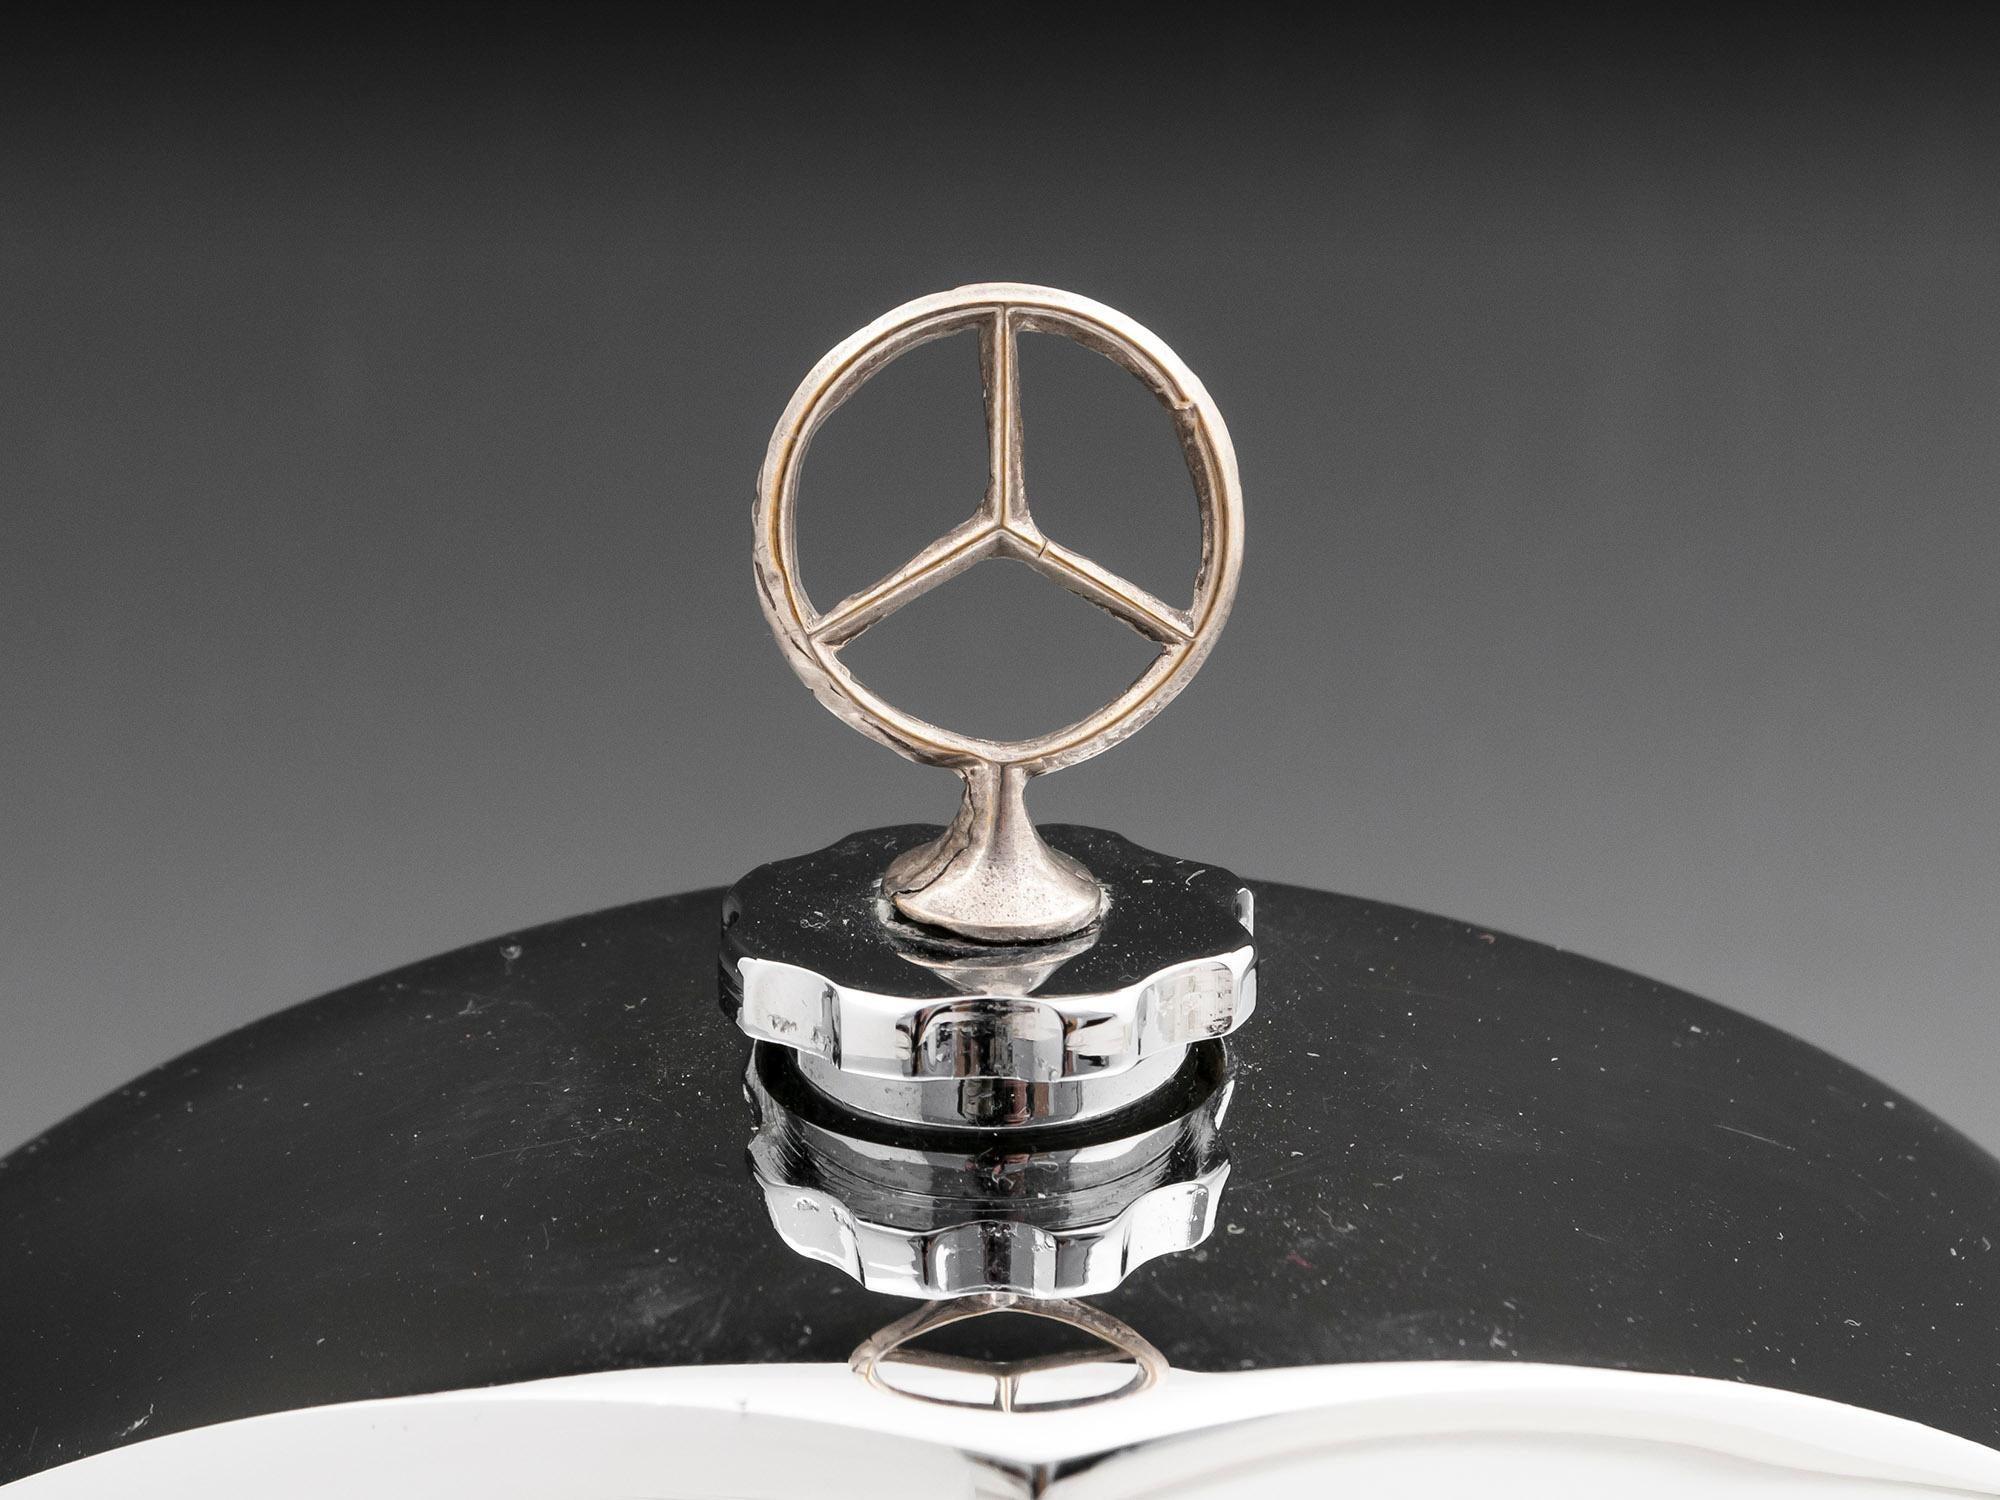 Chrome Mercedes Radiator Grill Decanter by Ruddspeed